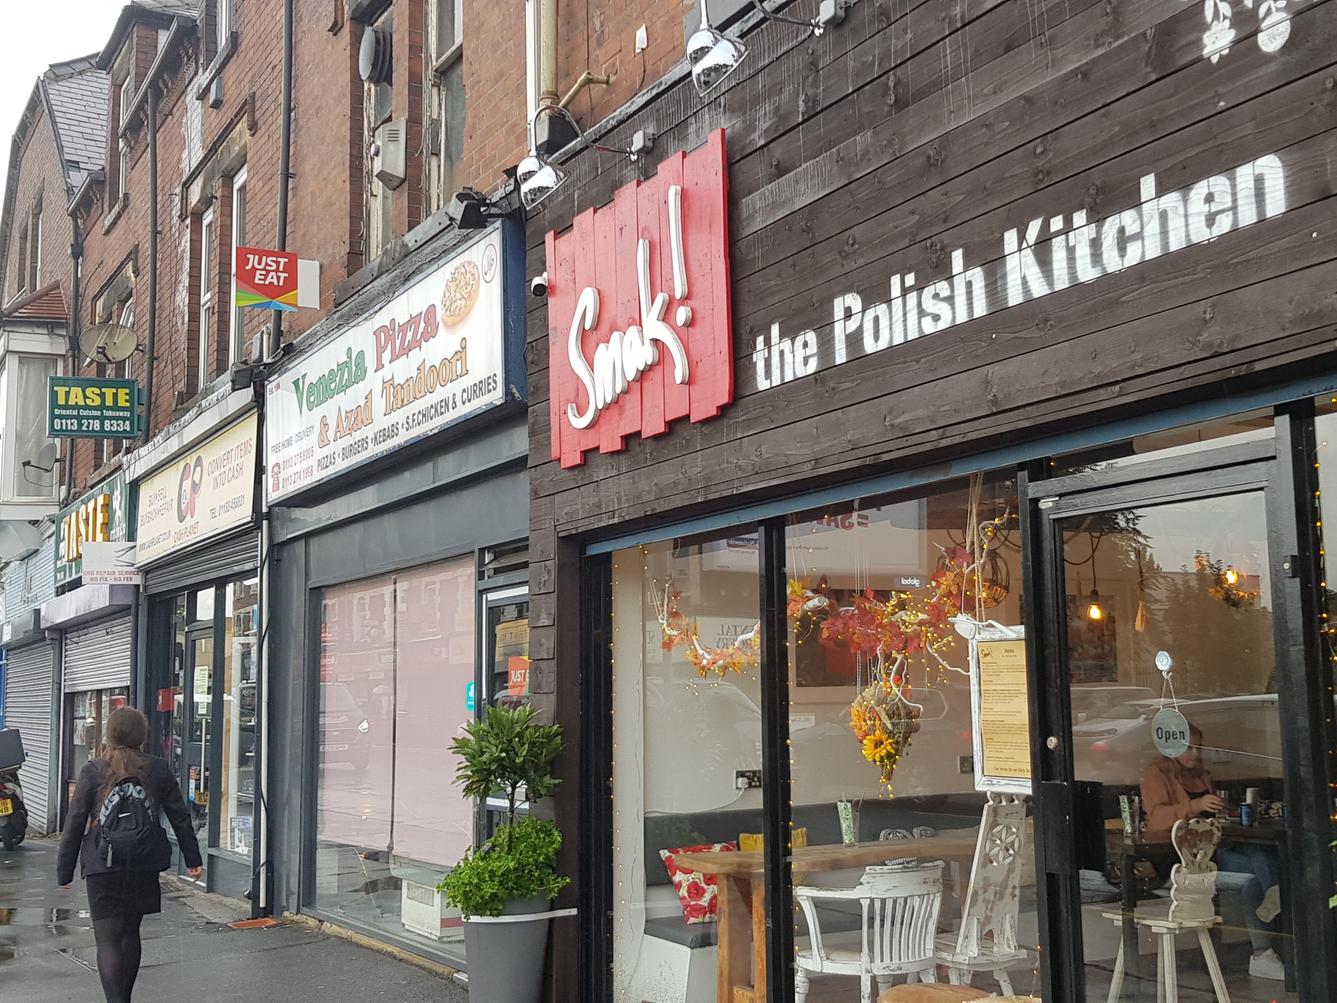 Traditional Polish cuisine with a contemporary twist, serving pierogi and other classics on Kirkstall Road. Lighter vegan bites are available.